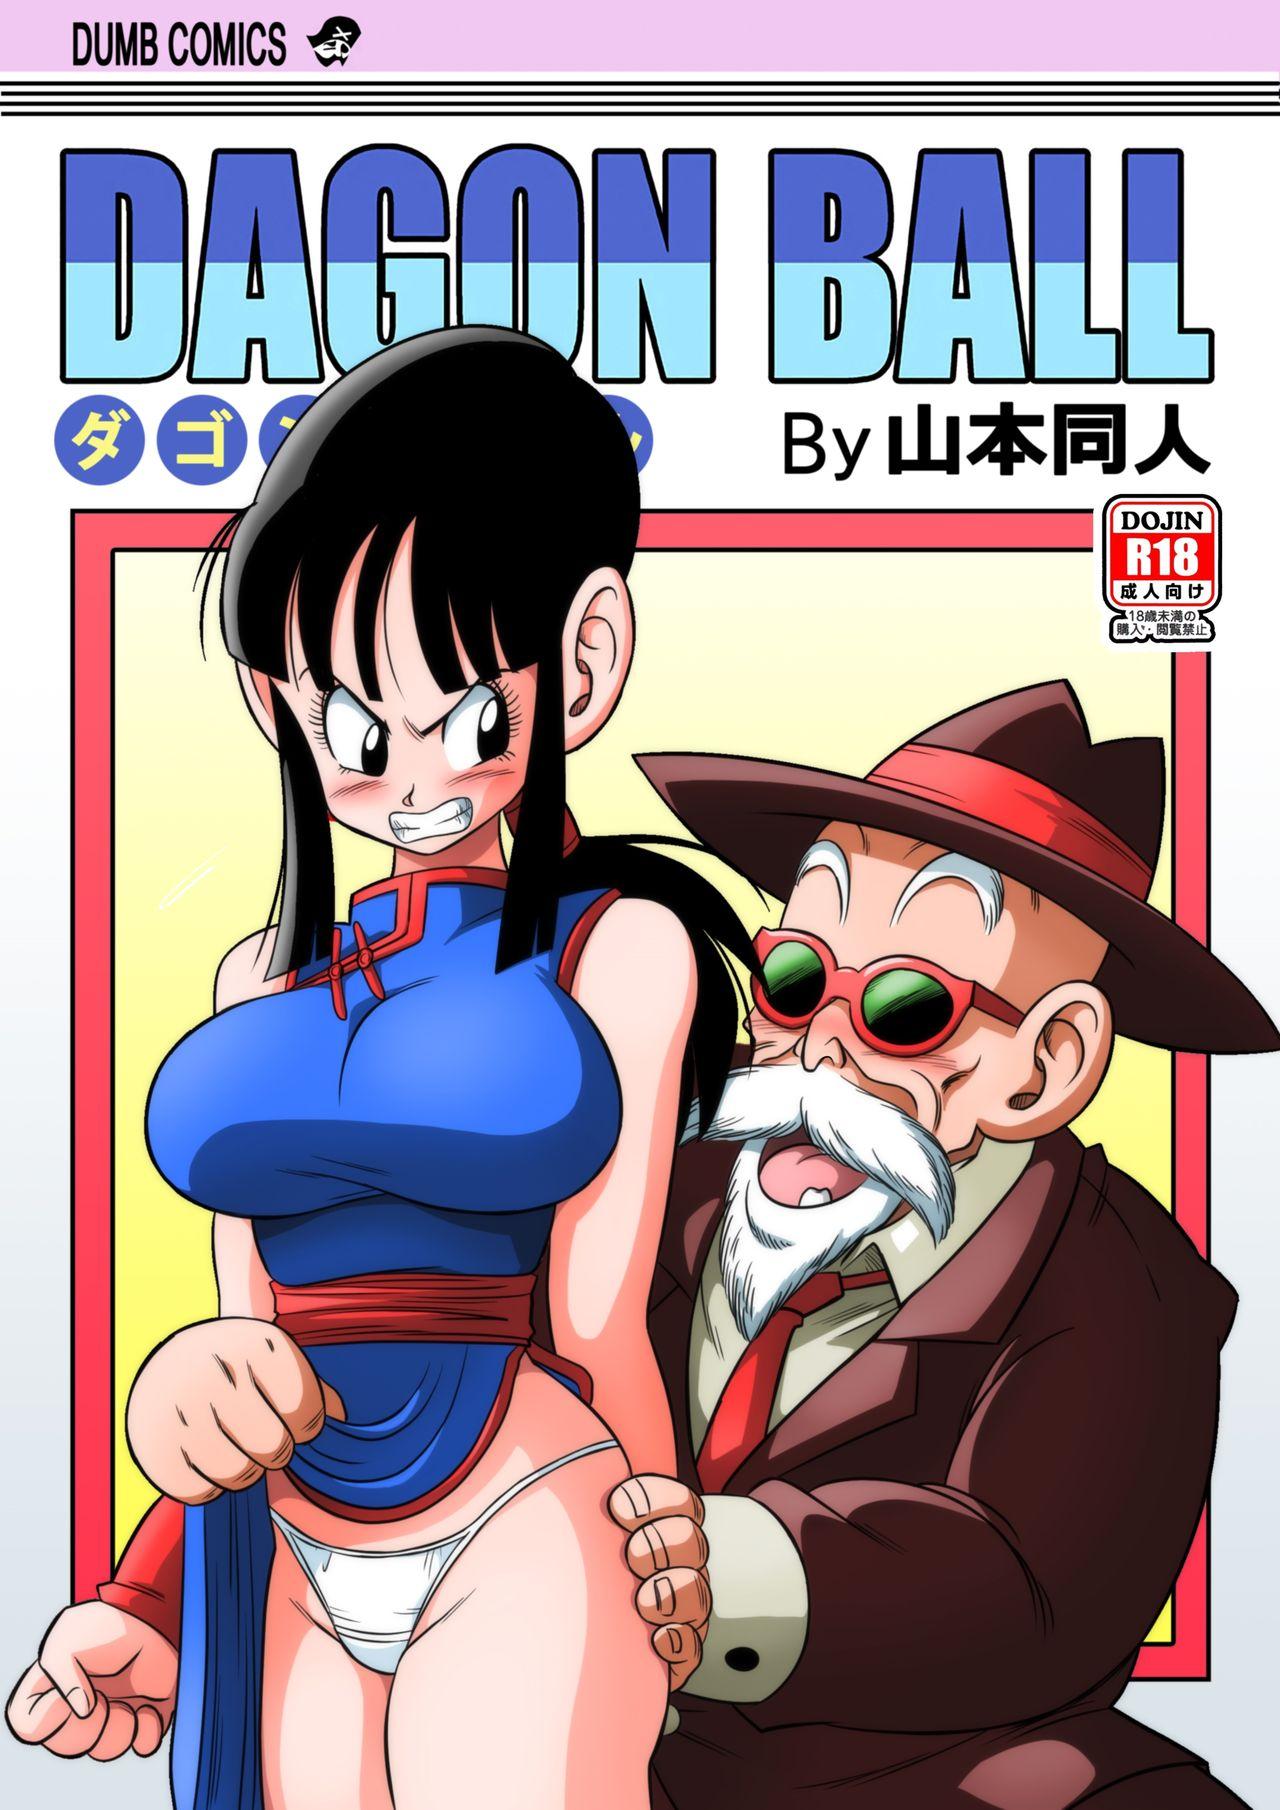 Hymen "An Ancient Tradition" - Young Wife is Harassed! - Dragon ball z Camgirl - Page 1